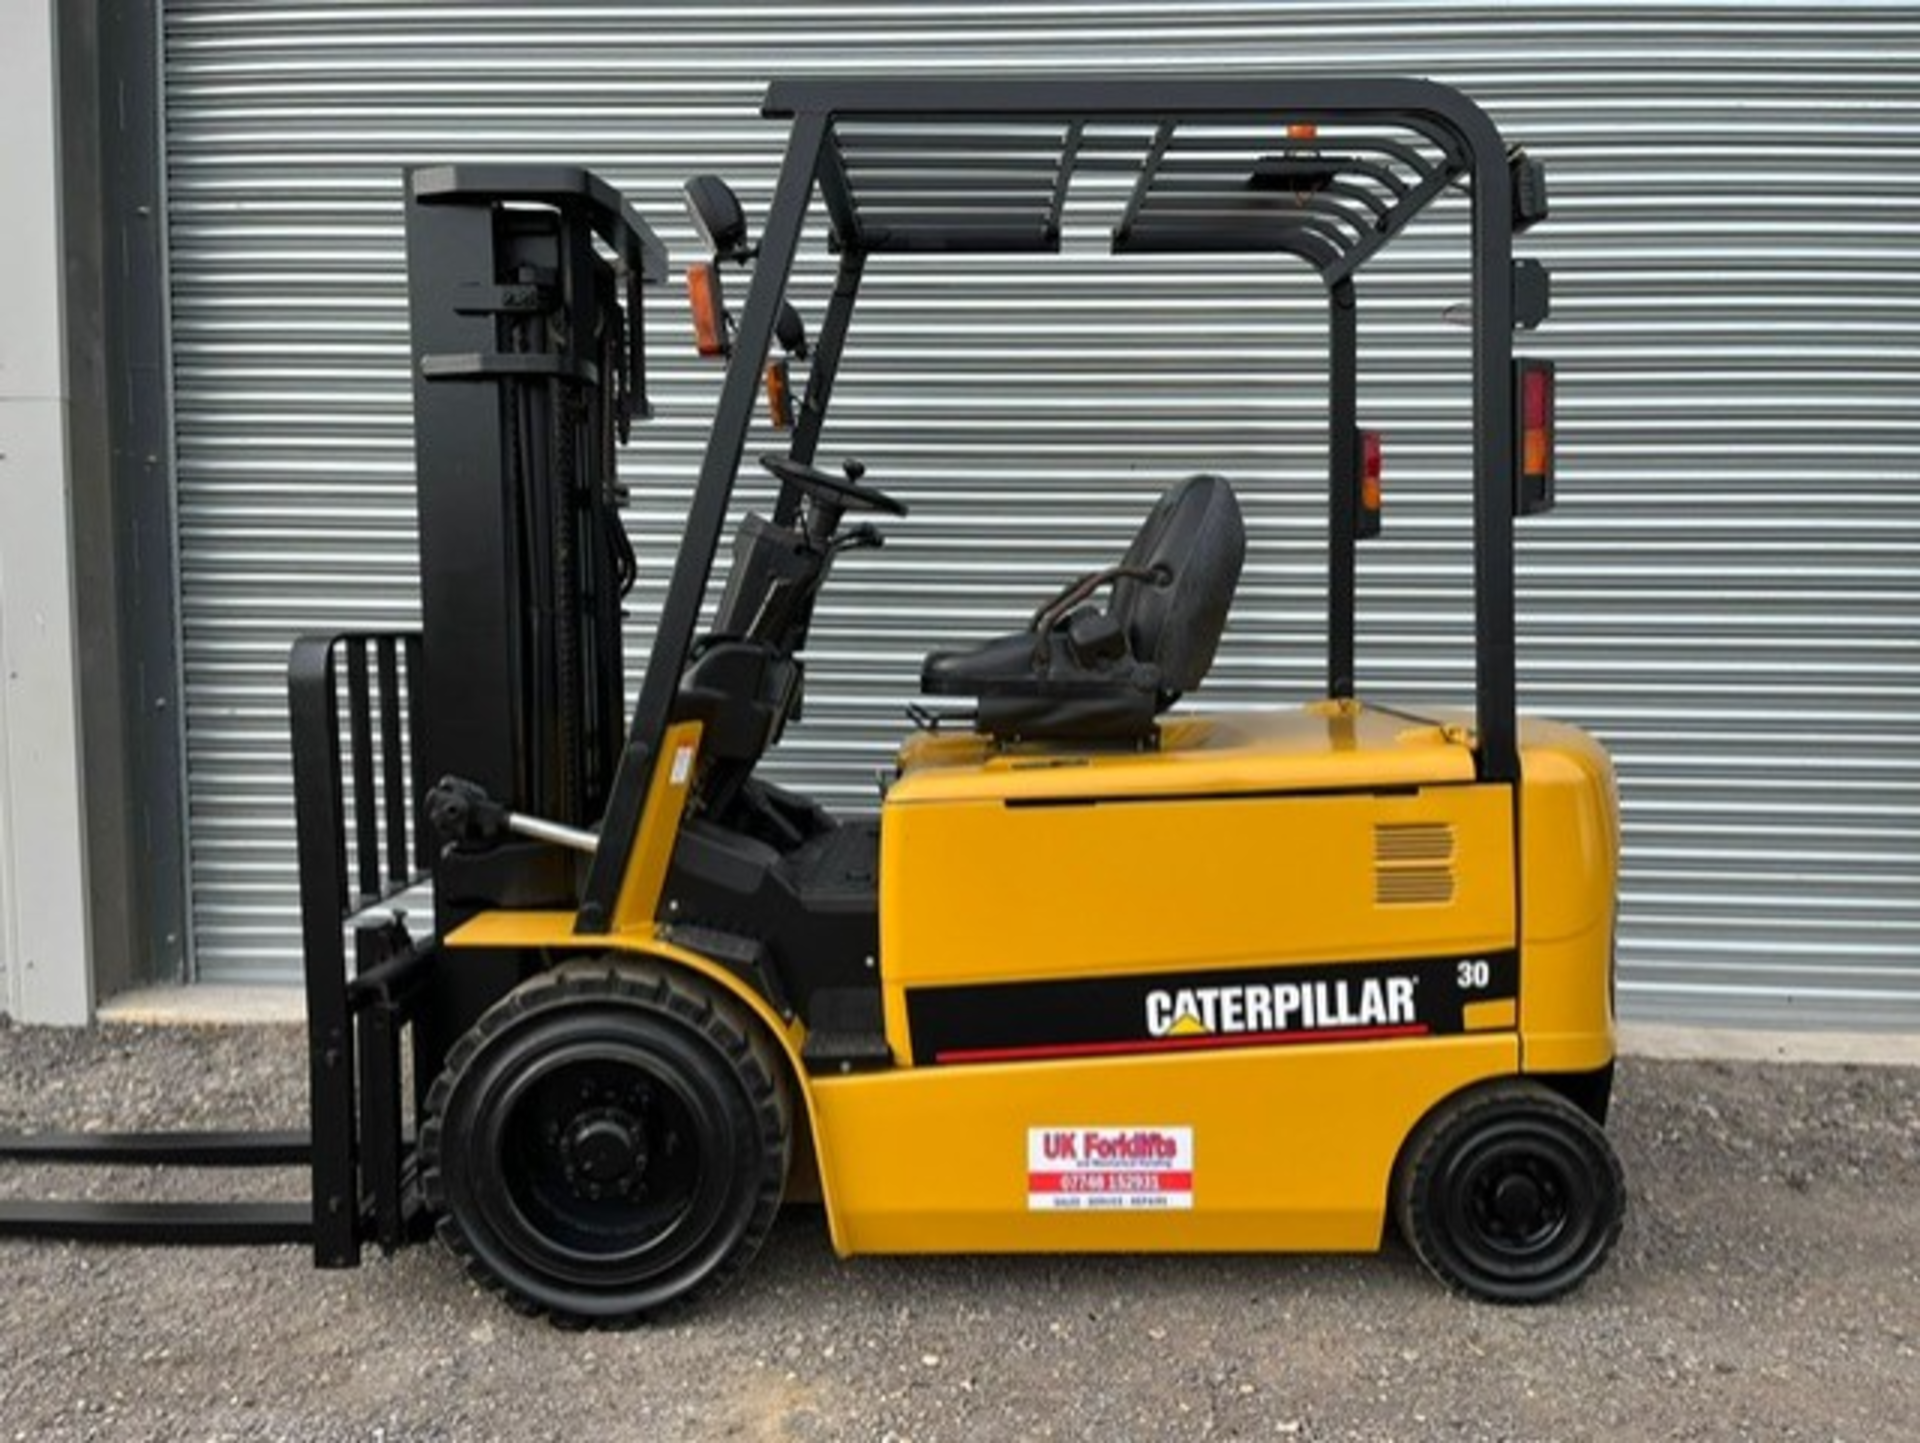 2003 CATERPILLAR, 3 Tonne Electric Forklift - Image 4 of 8